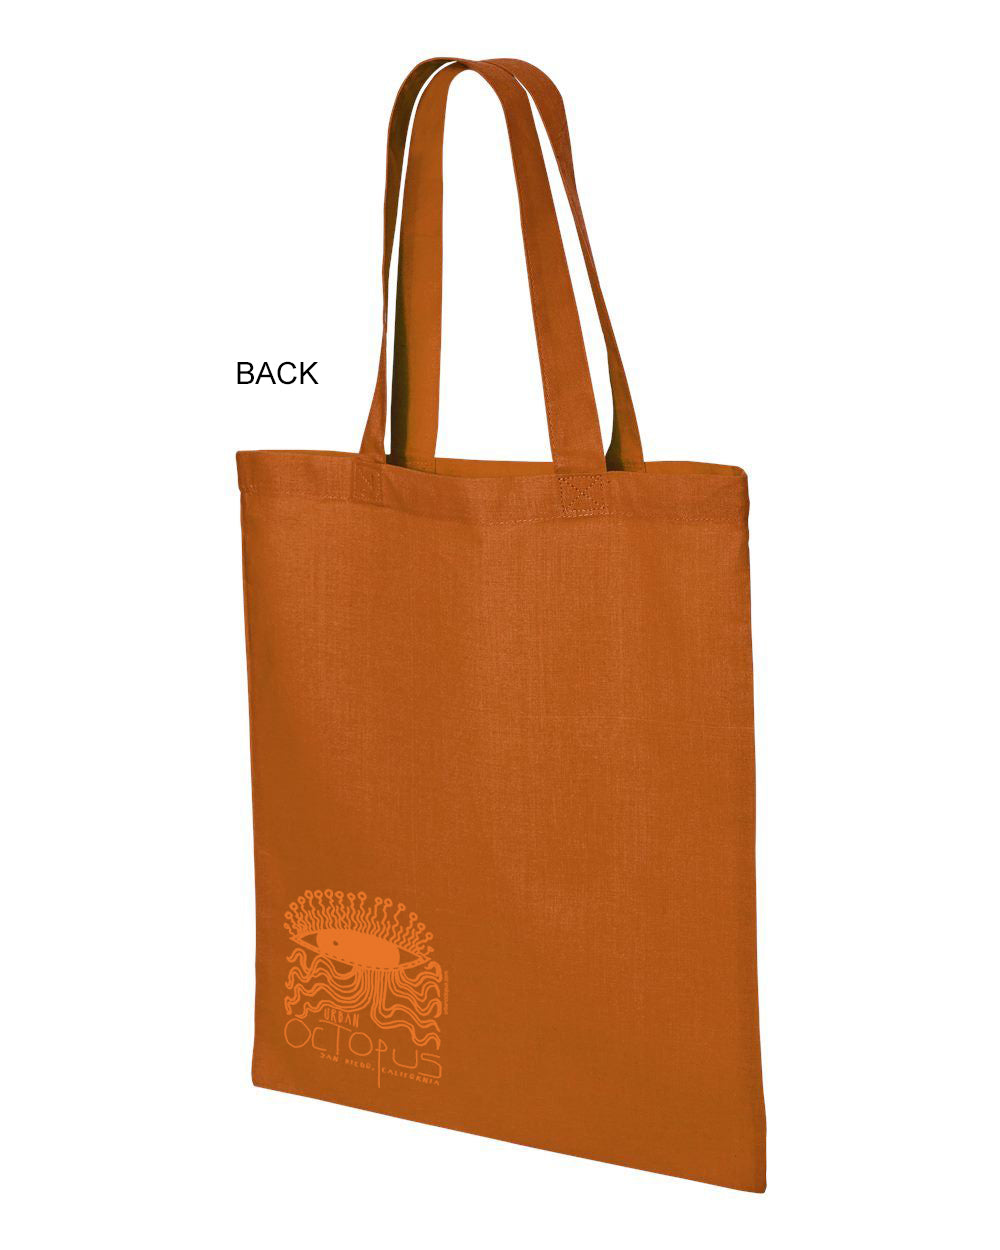 "The Octopus Sun" Tote canvas bag